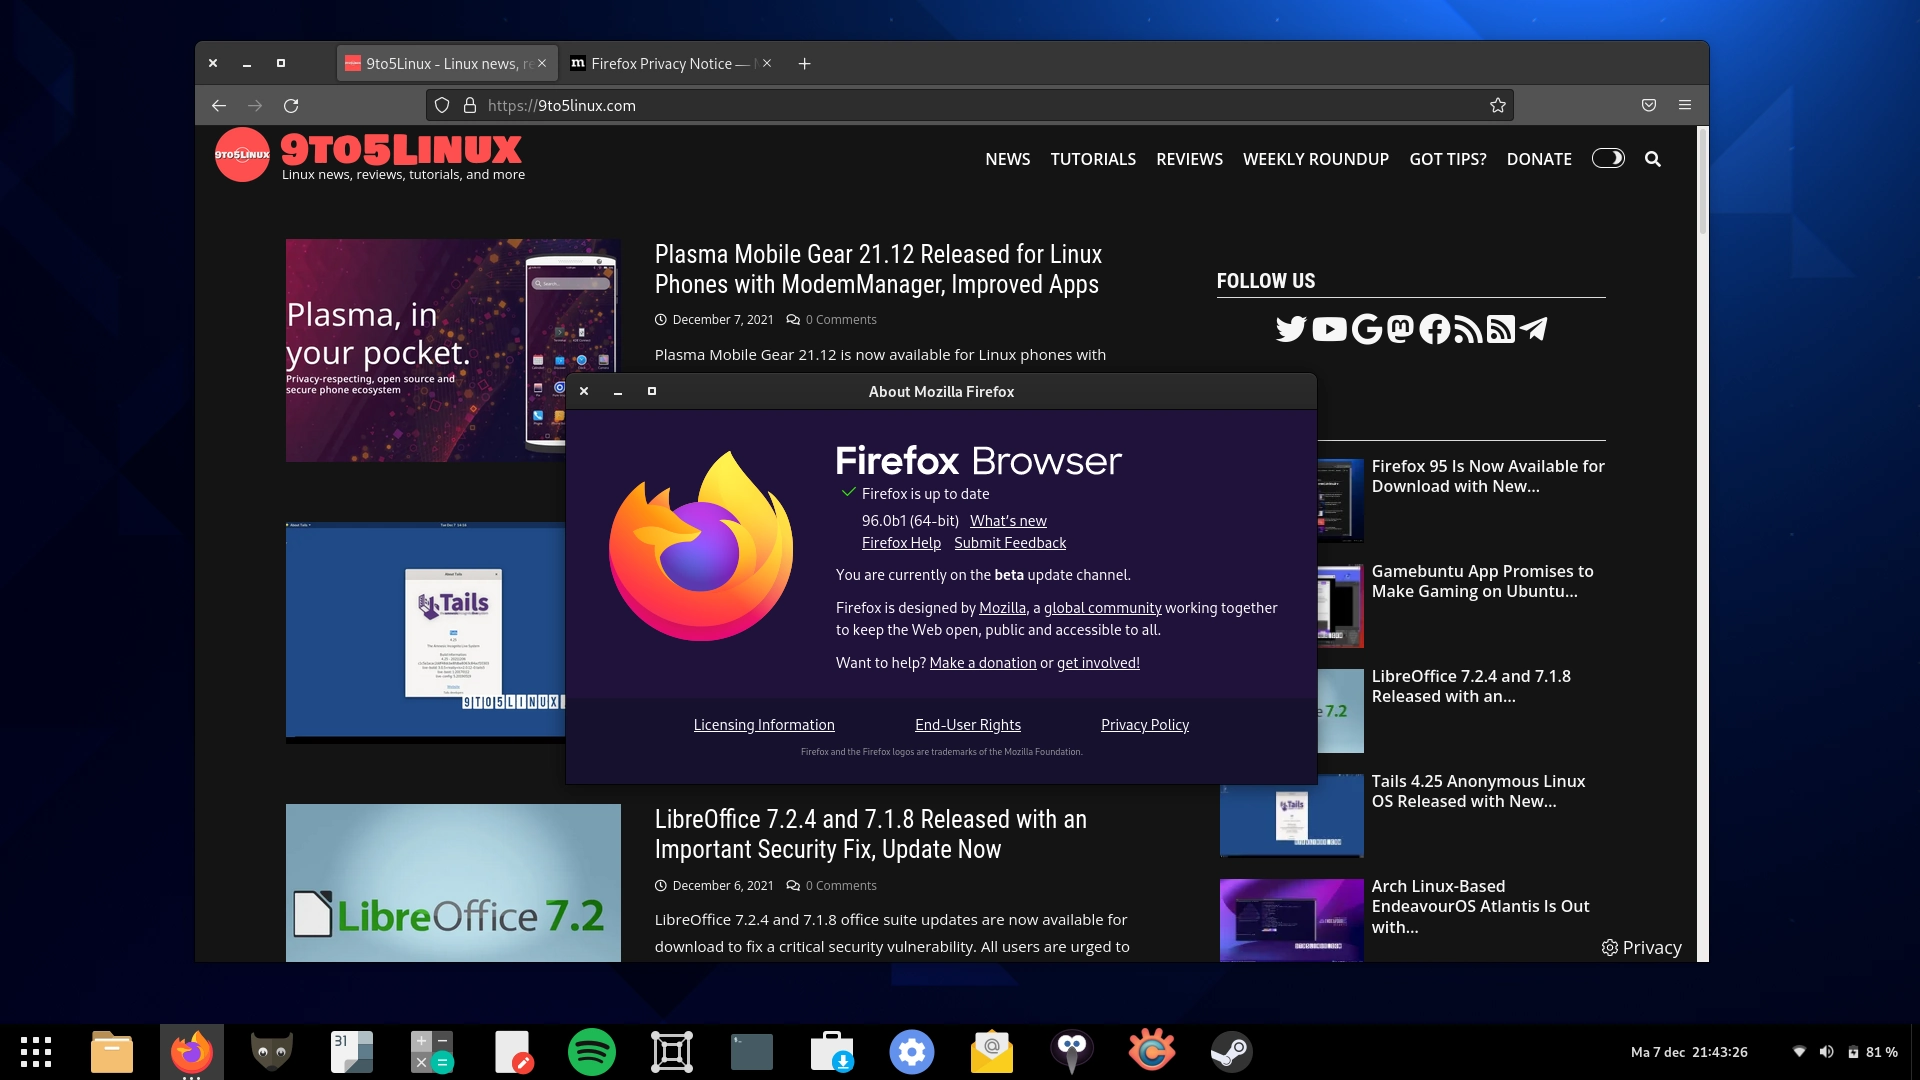 Firefox 96 Enters Public Beta Testing with More Performance and Security Improvements